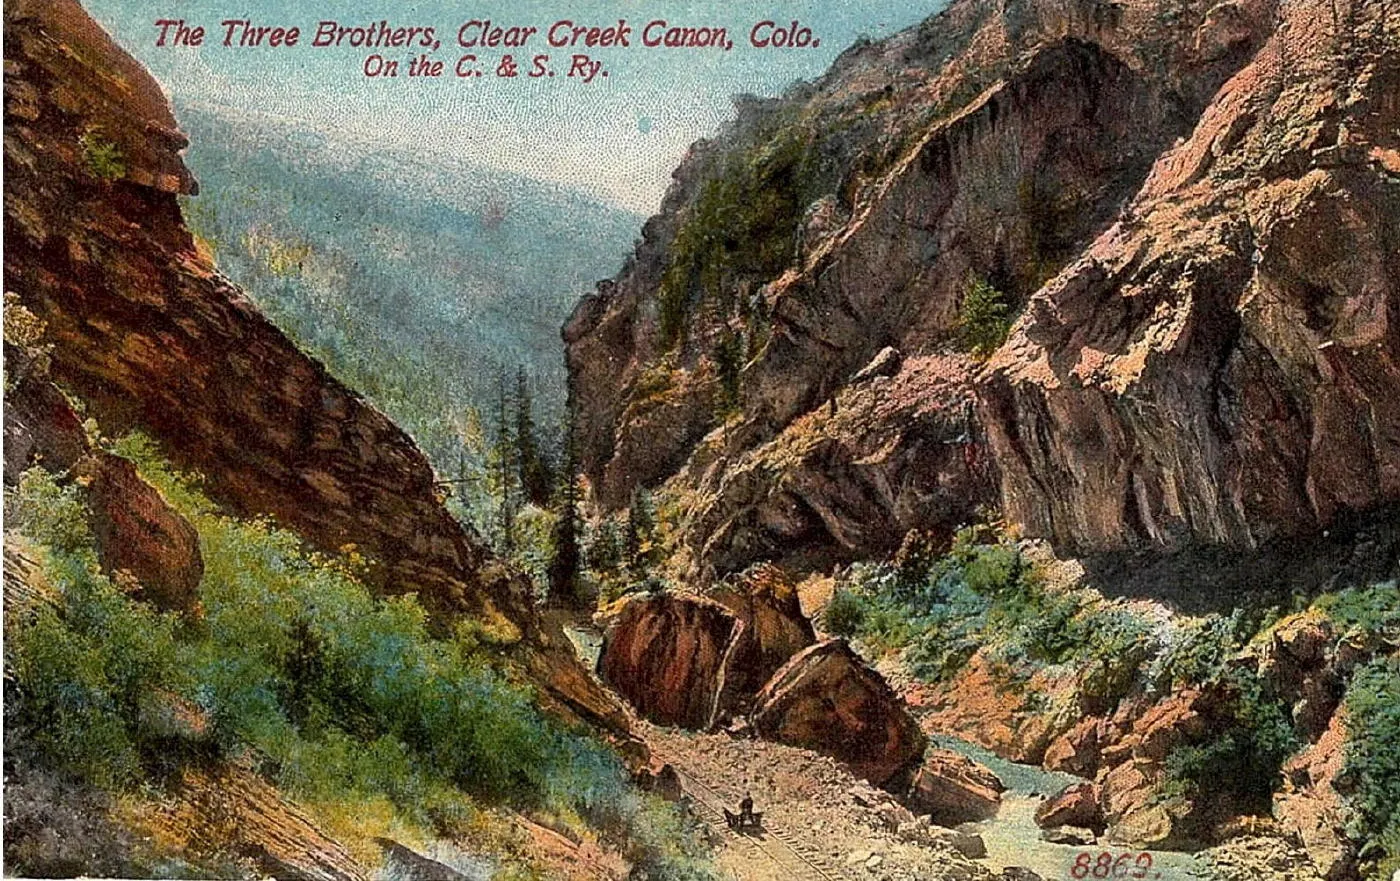 Hand-tinted postcard shows a narrow canyon with red rock walls.  Title labels it "The Three Brothers"